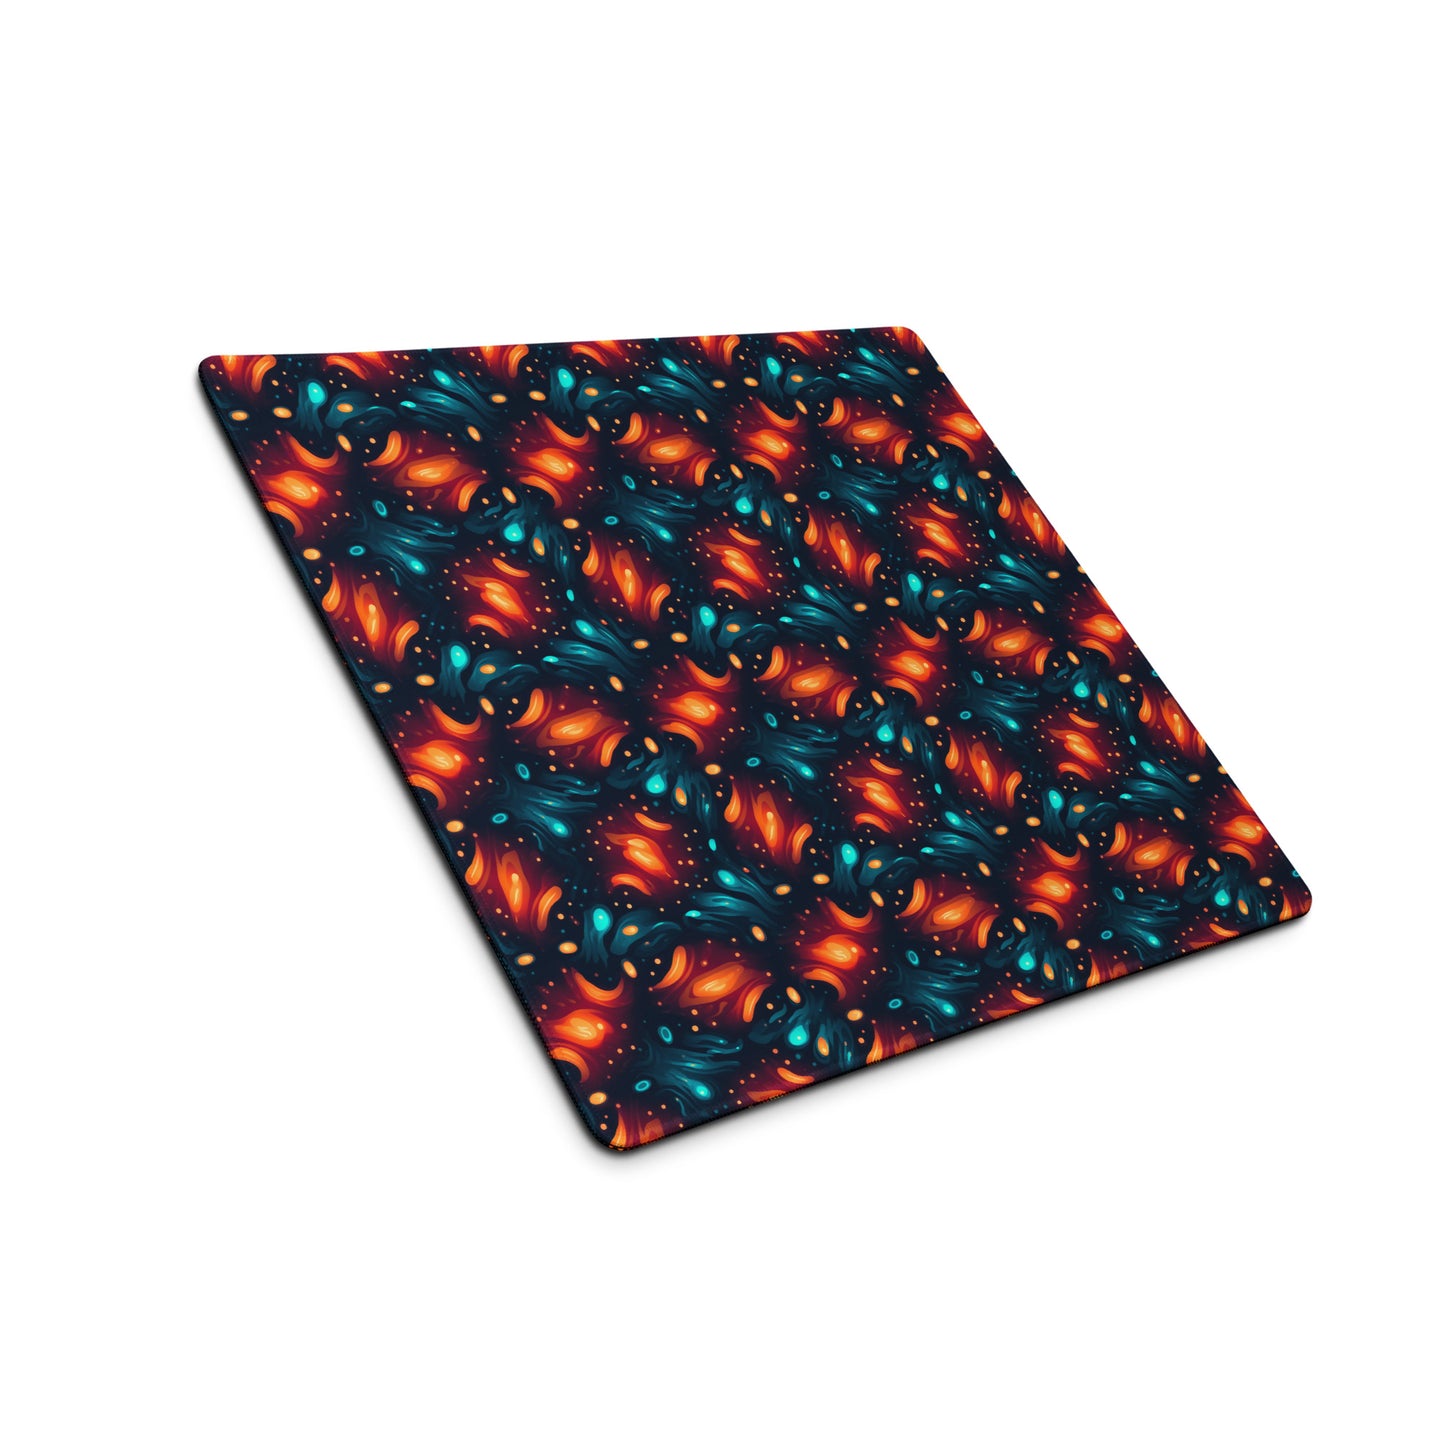 A 18" x 16" desk pad with a blue and orange abstract cross hatch pattern sitting at an angle.